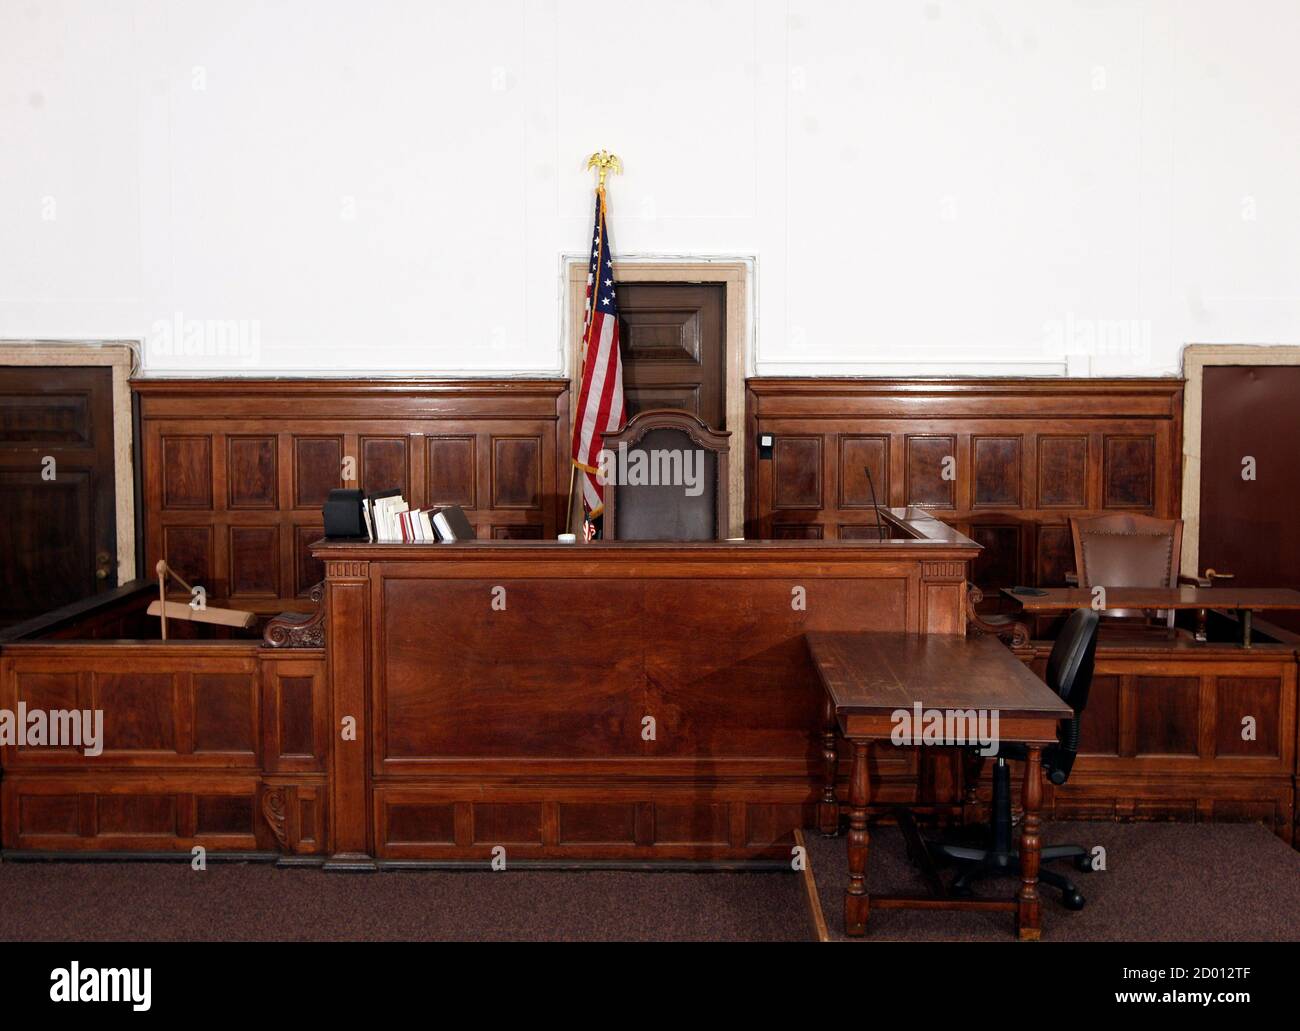 The Judge S Chair C The Witness Stand R And Stenographer S Desk Front Are Seen In Court Room 422 Of The New York Supreme Court At 60 Centre Street February 3 12 Picture